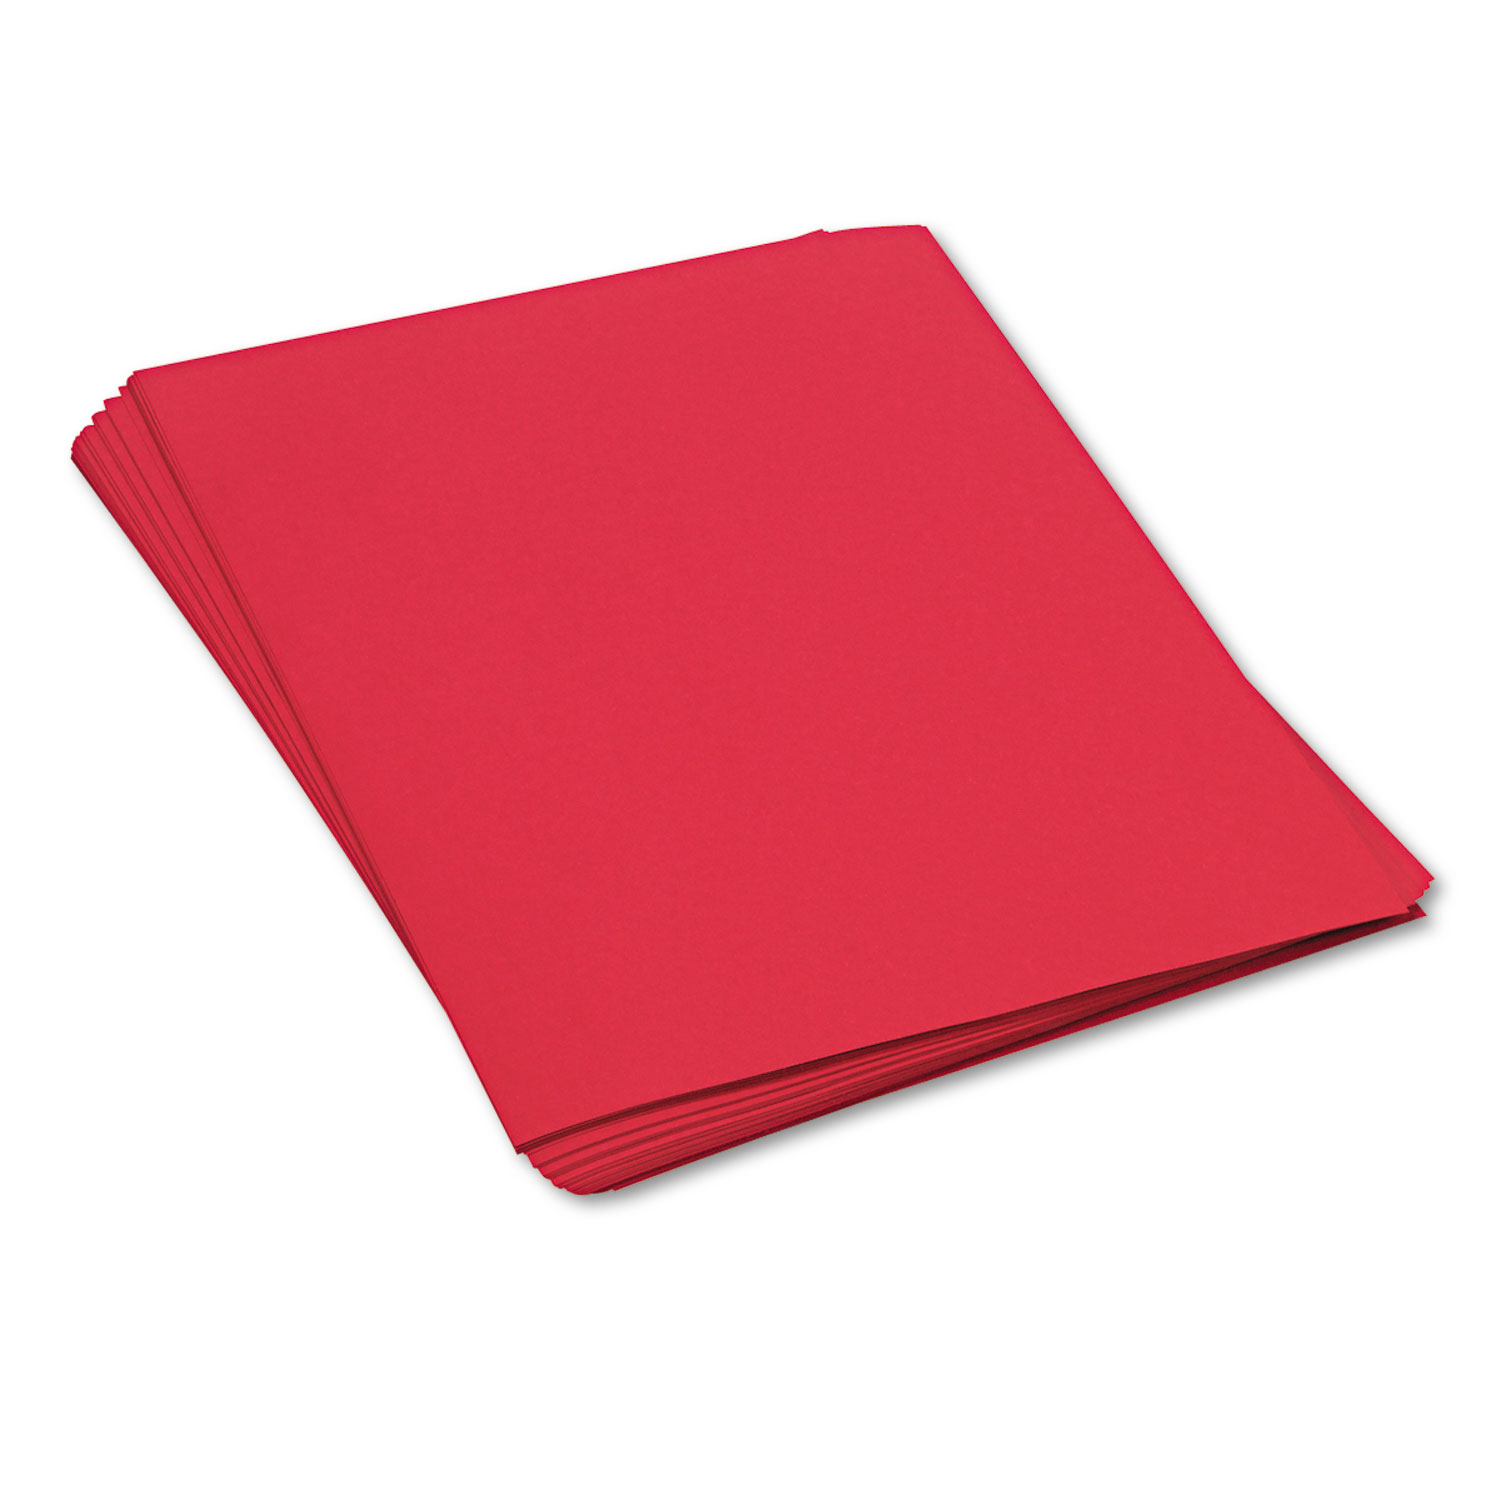  SunWorks 9917 Construction Paper, 58lb, 18 x 24, Holiday Red, 50/Pack (PAC9917) 